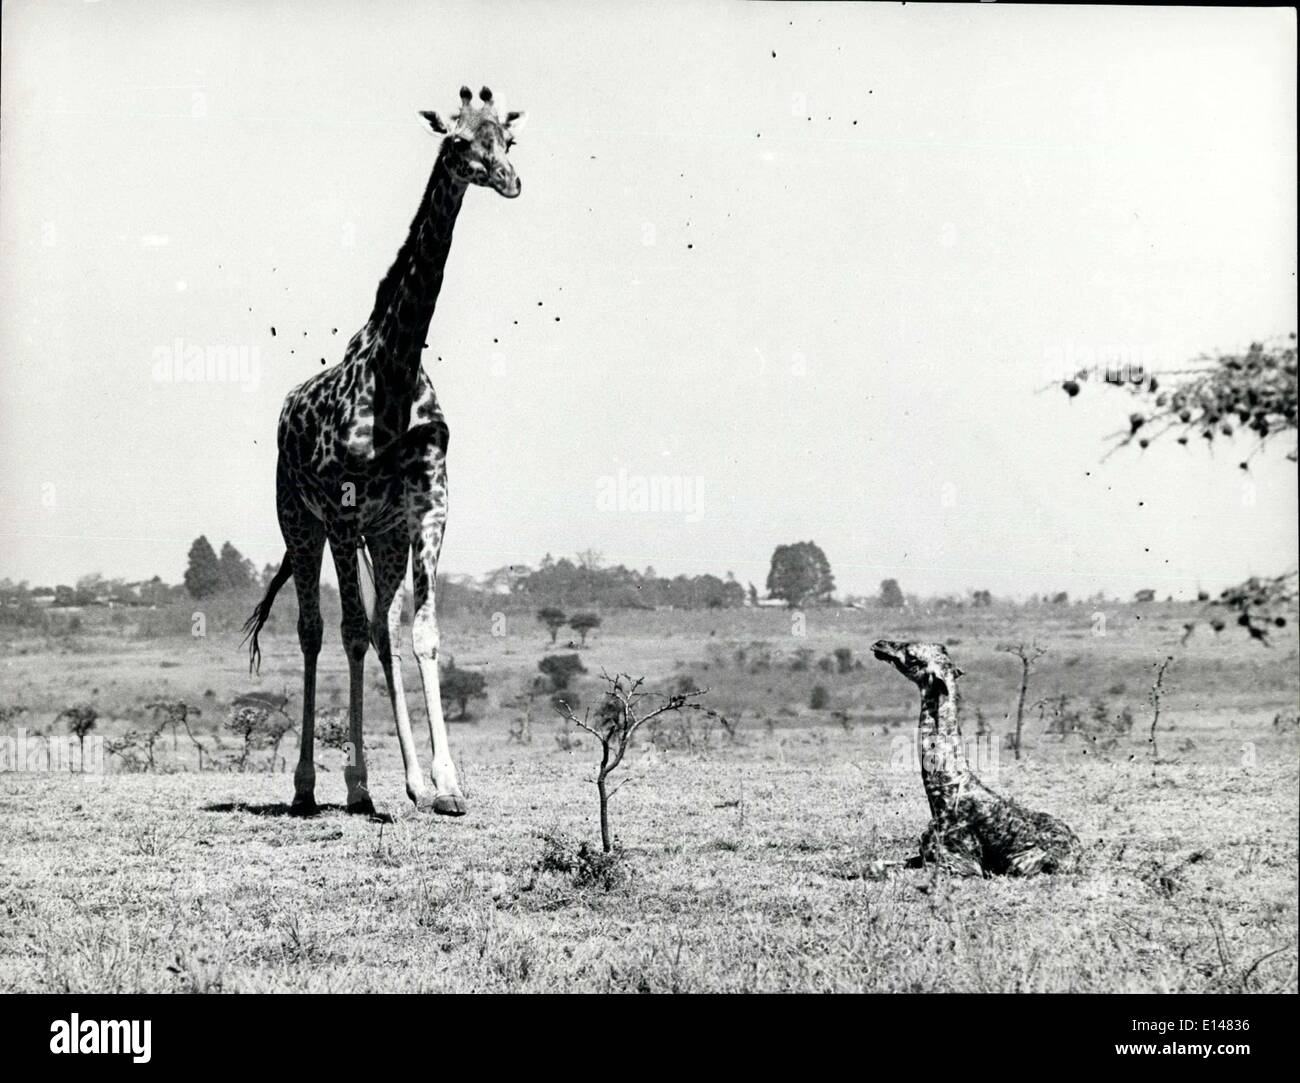 Apr. 17, 2012 - The new born Giraffe looks at it's mother for arrangement to stand for the first time. Stock Photo